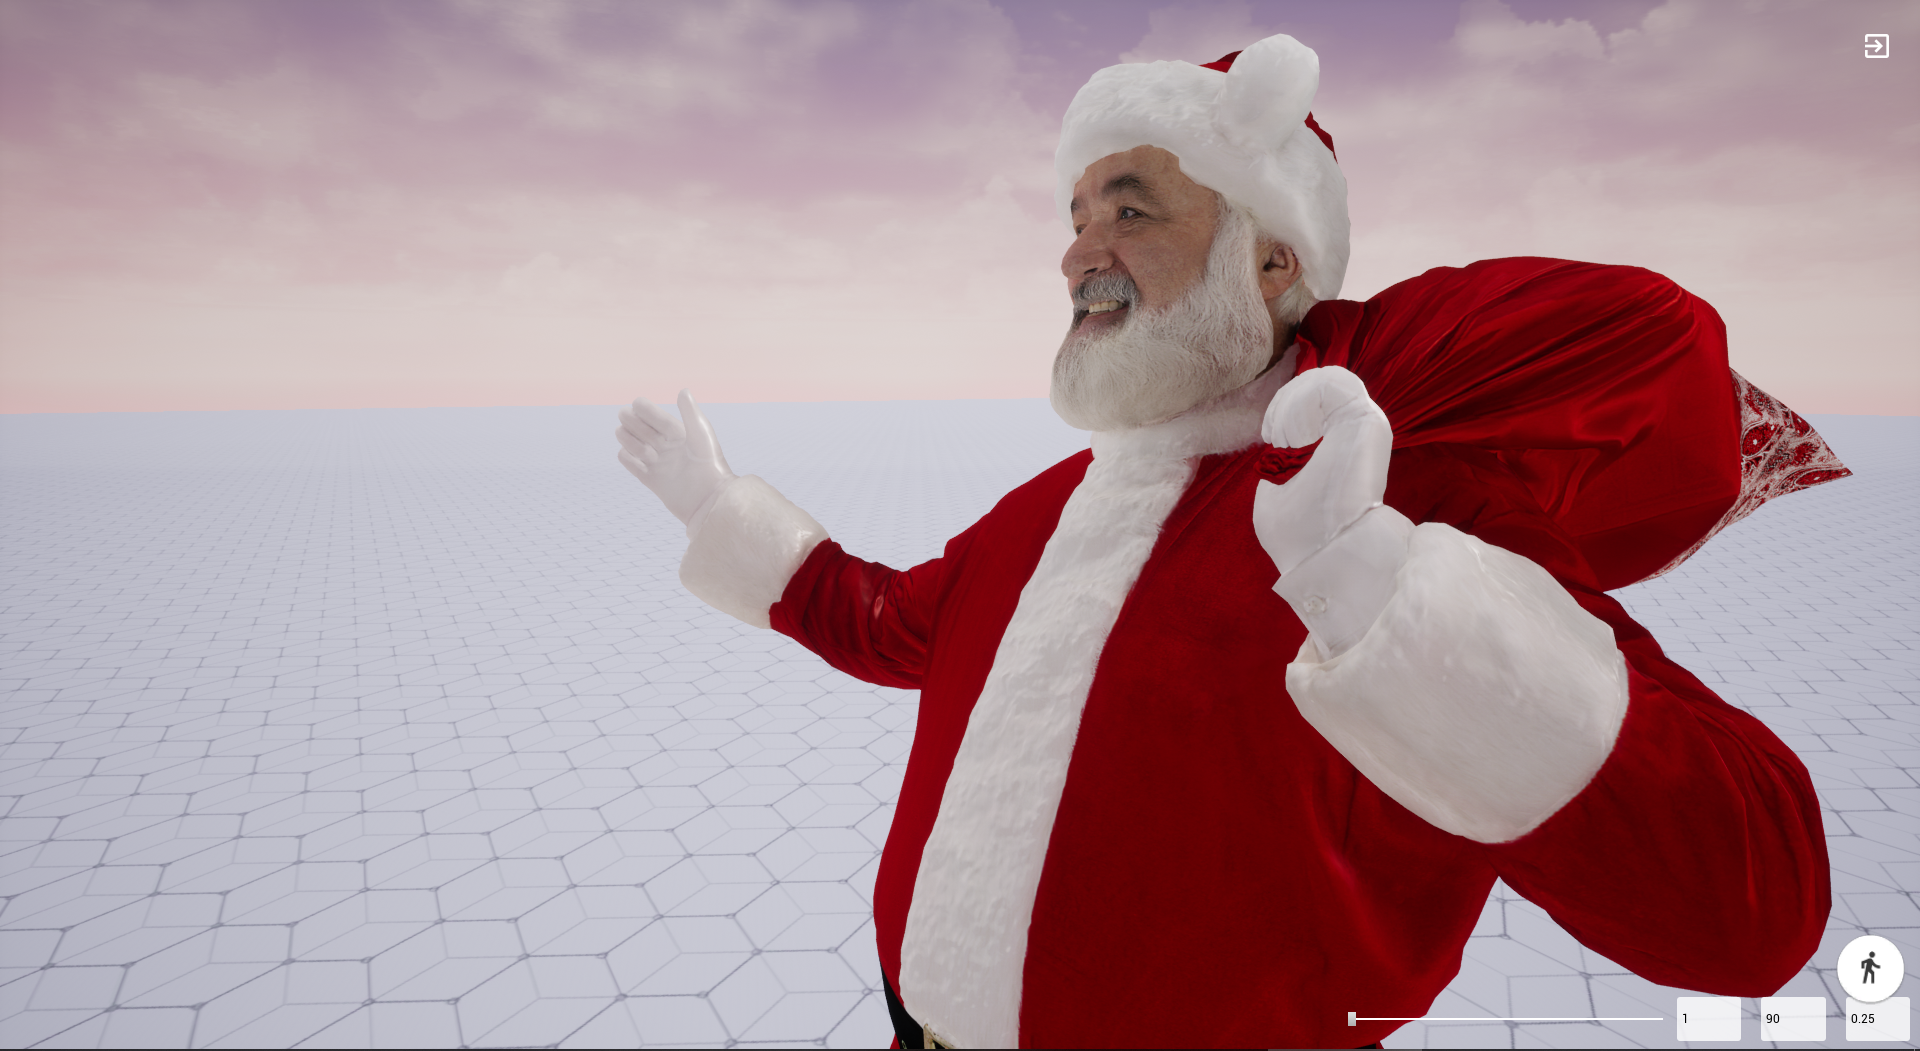 8k 3d model with realistic, photo-scanned textures to AR & VR in 3 minutes (Xmas edition)